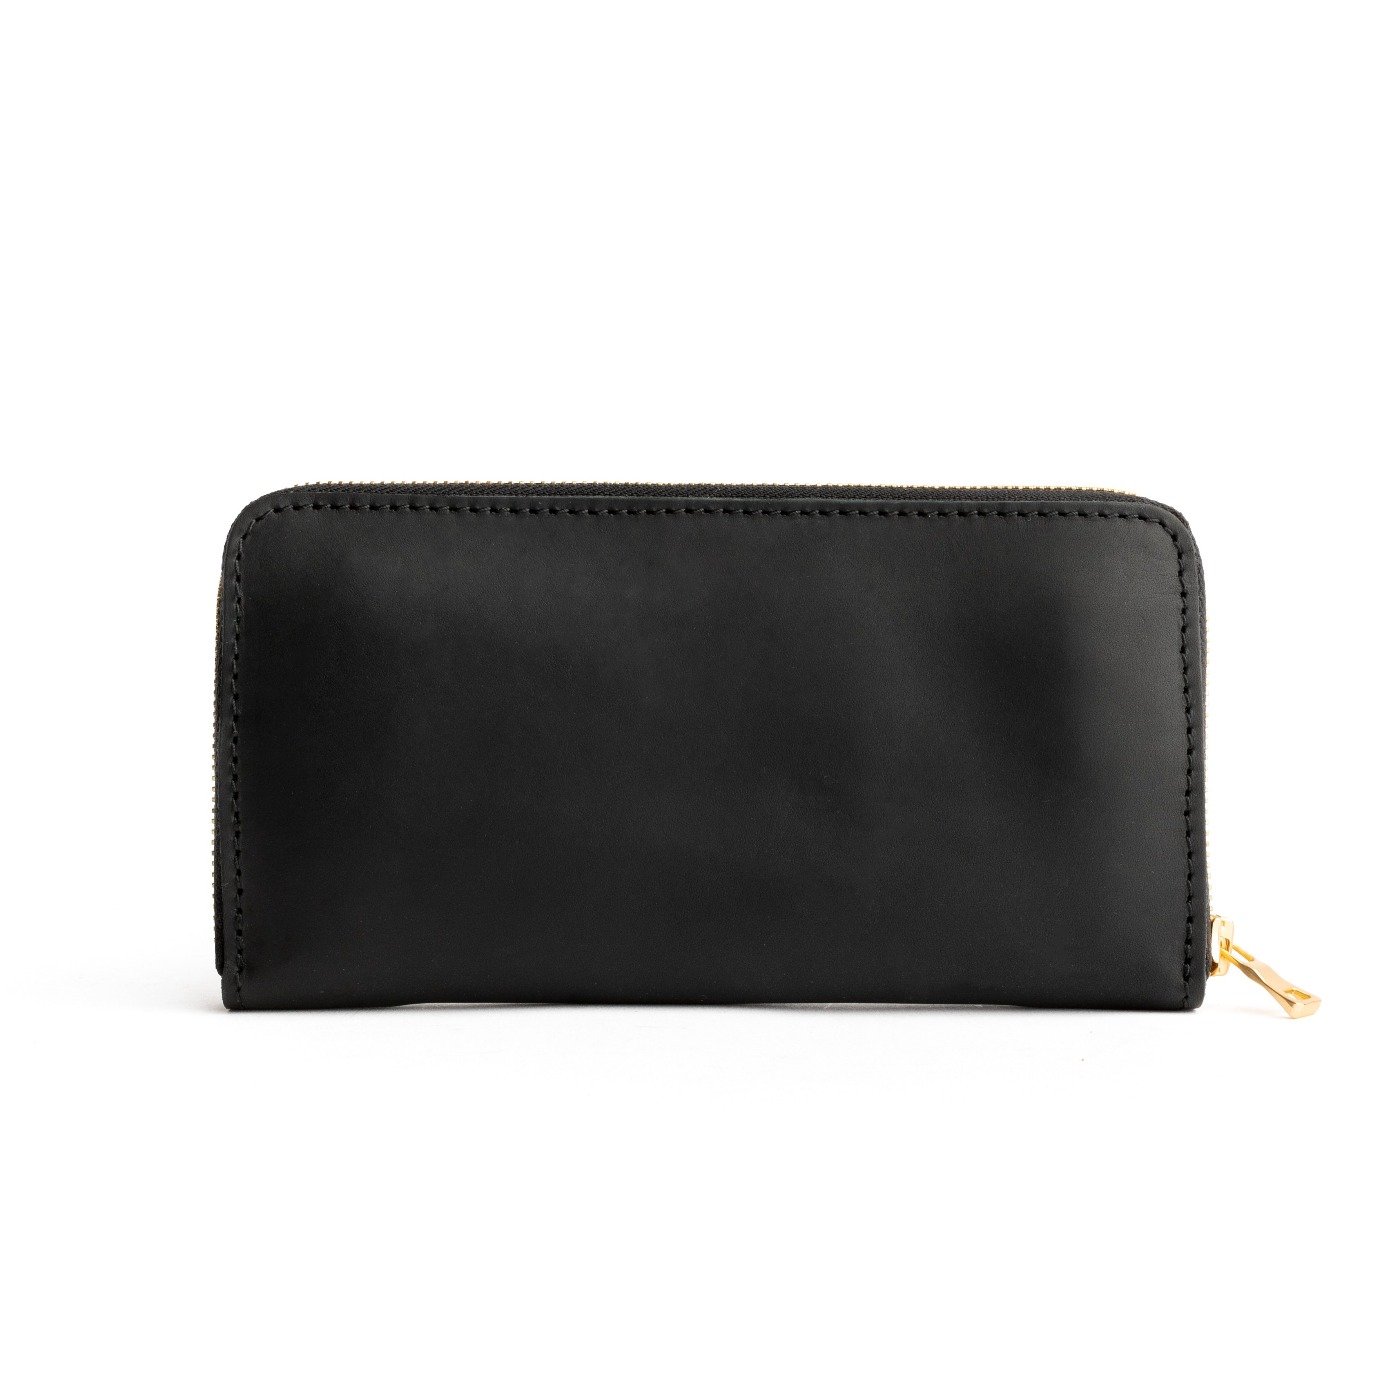 All Color: Black | leather handmade wallet